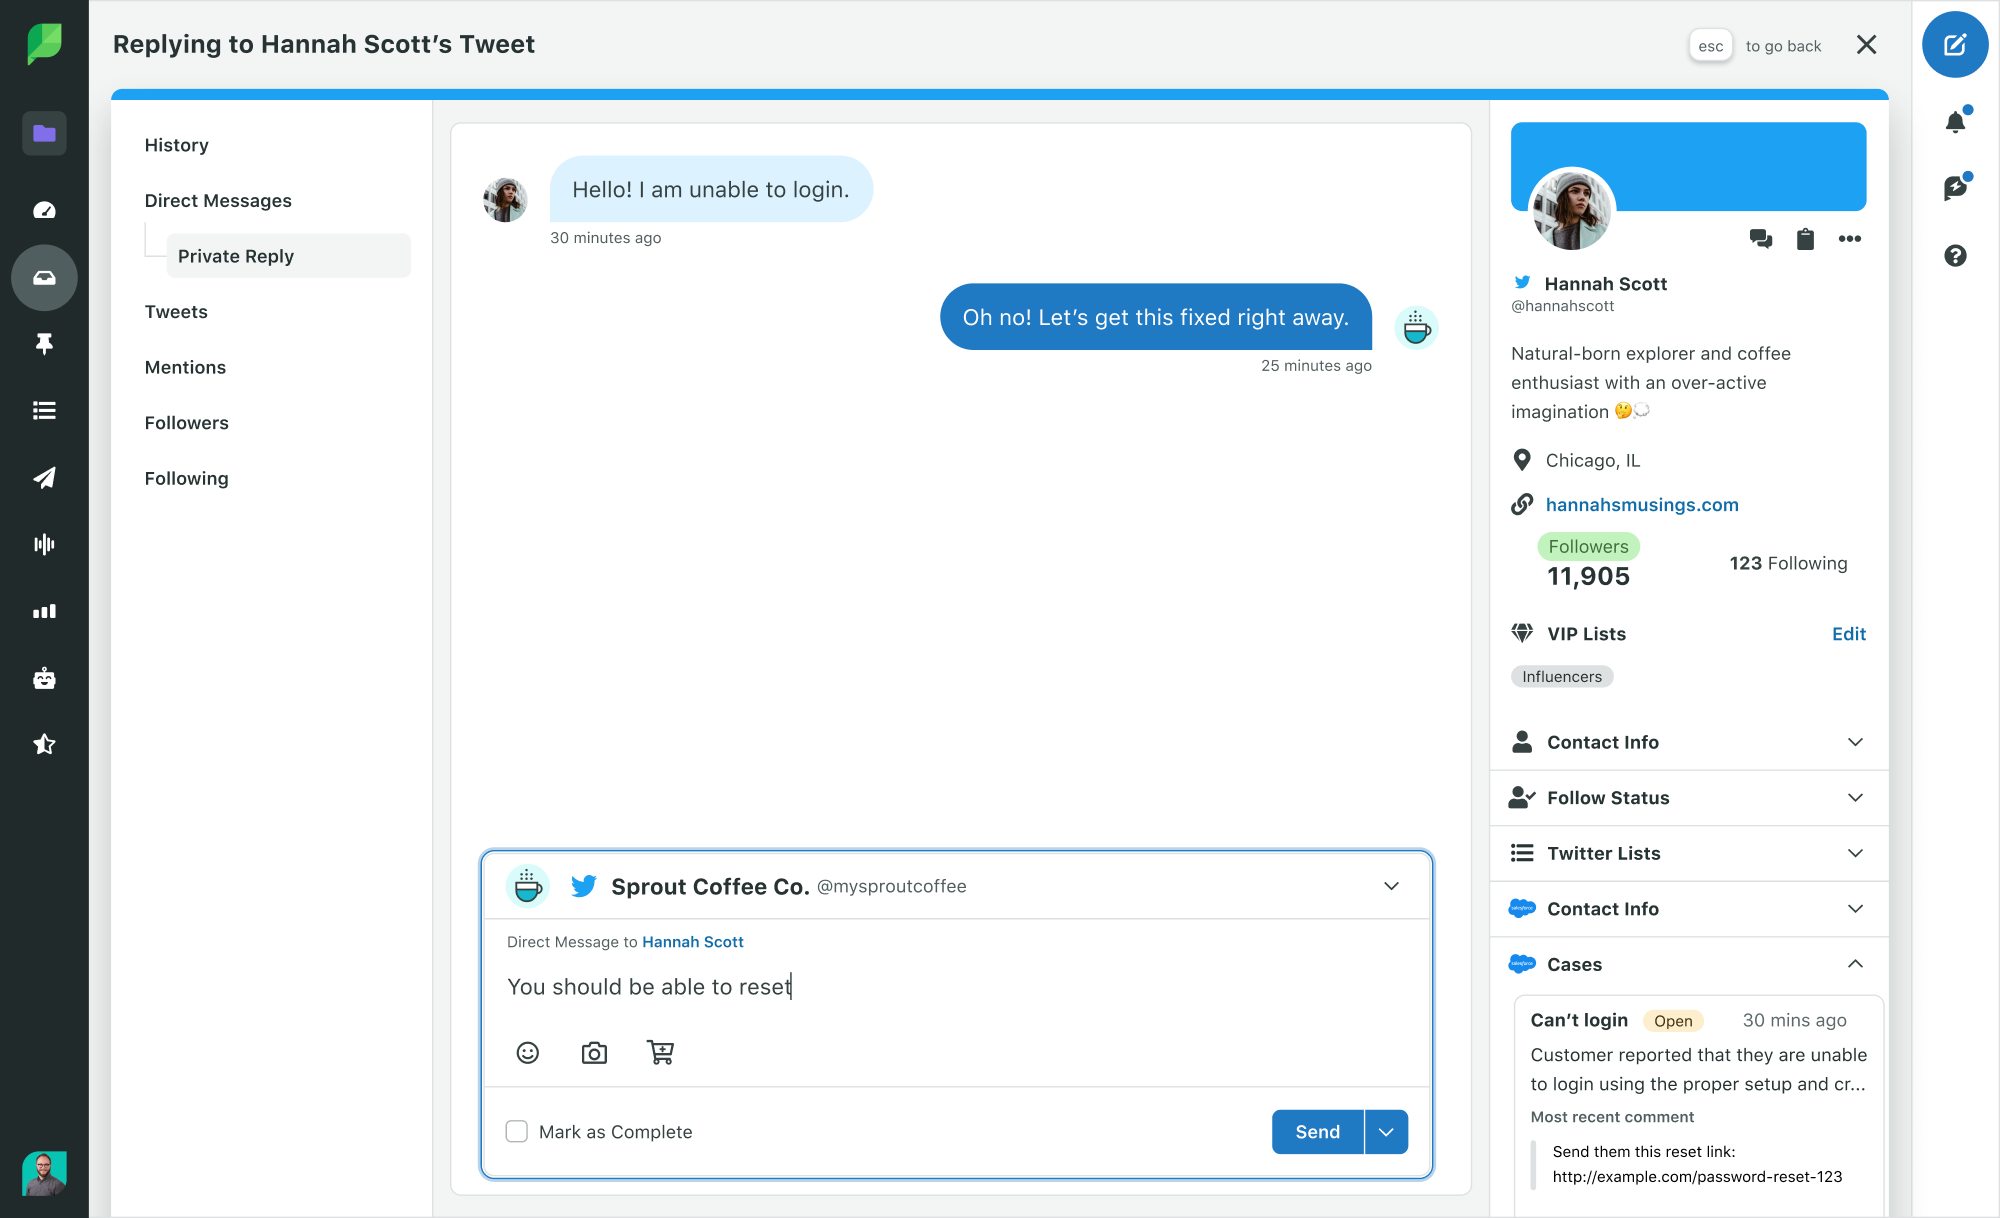 A screenshot from the Sprout Inbox of an interaction between an X user (formerly Twitter) and a brand. In the right-hand side of the screen, you can see the X user's linked Salesforce info, like past cases and contact info.